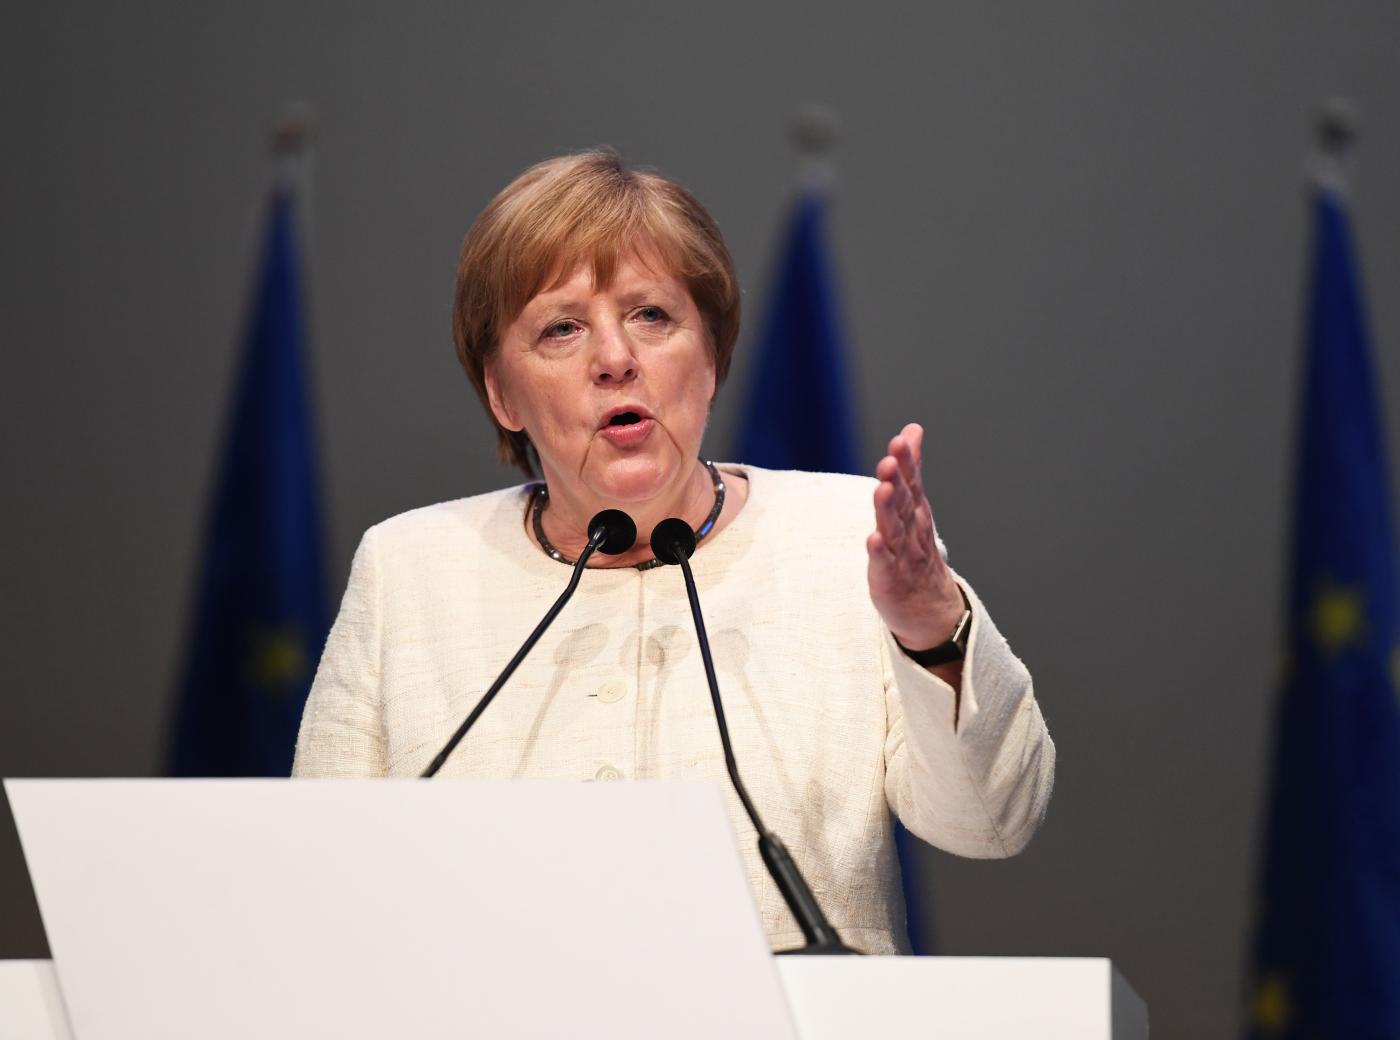 MUNICH, May 24, 2019 (Xinhua) -- German Chancellor Angela Merkel speaks during Manfred Weber's last campaign rally ahead of the election in Munich, Germany, on May 24, 2019. "Europe stands for security and prosperity," Manfred Weber, top candidate of the European People's Party (EPP) for the European elections, said here Friday, calling on voters to defend Europe against nationalism. (Xinhua/Lu Yang/IANS) by .